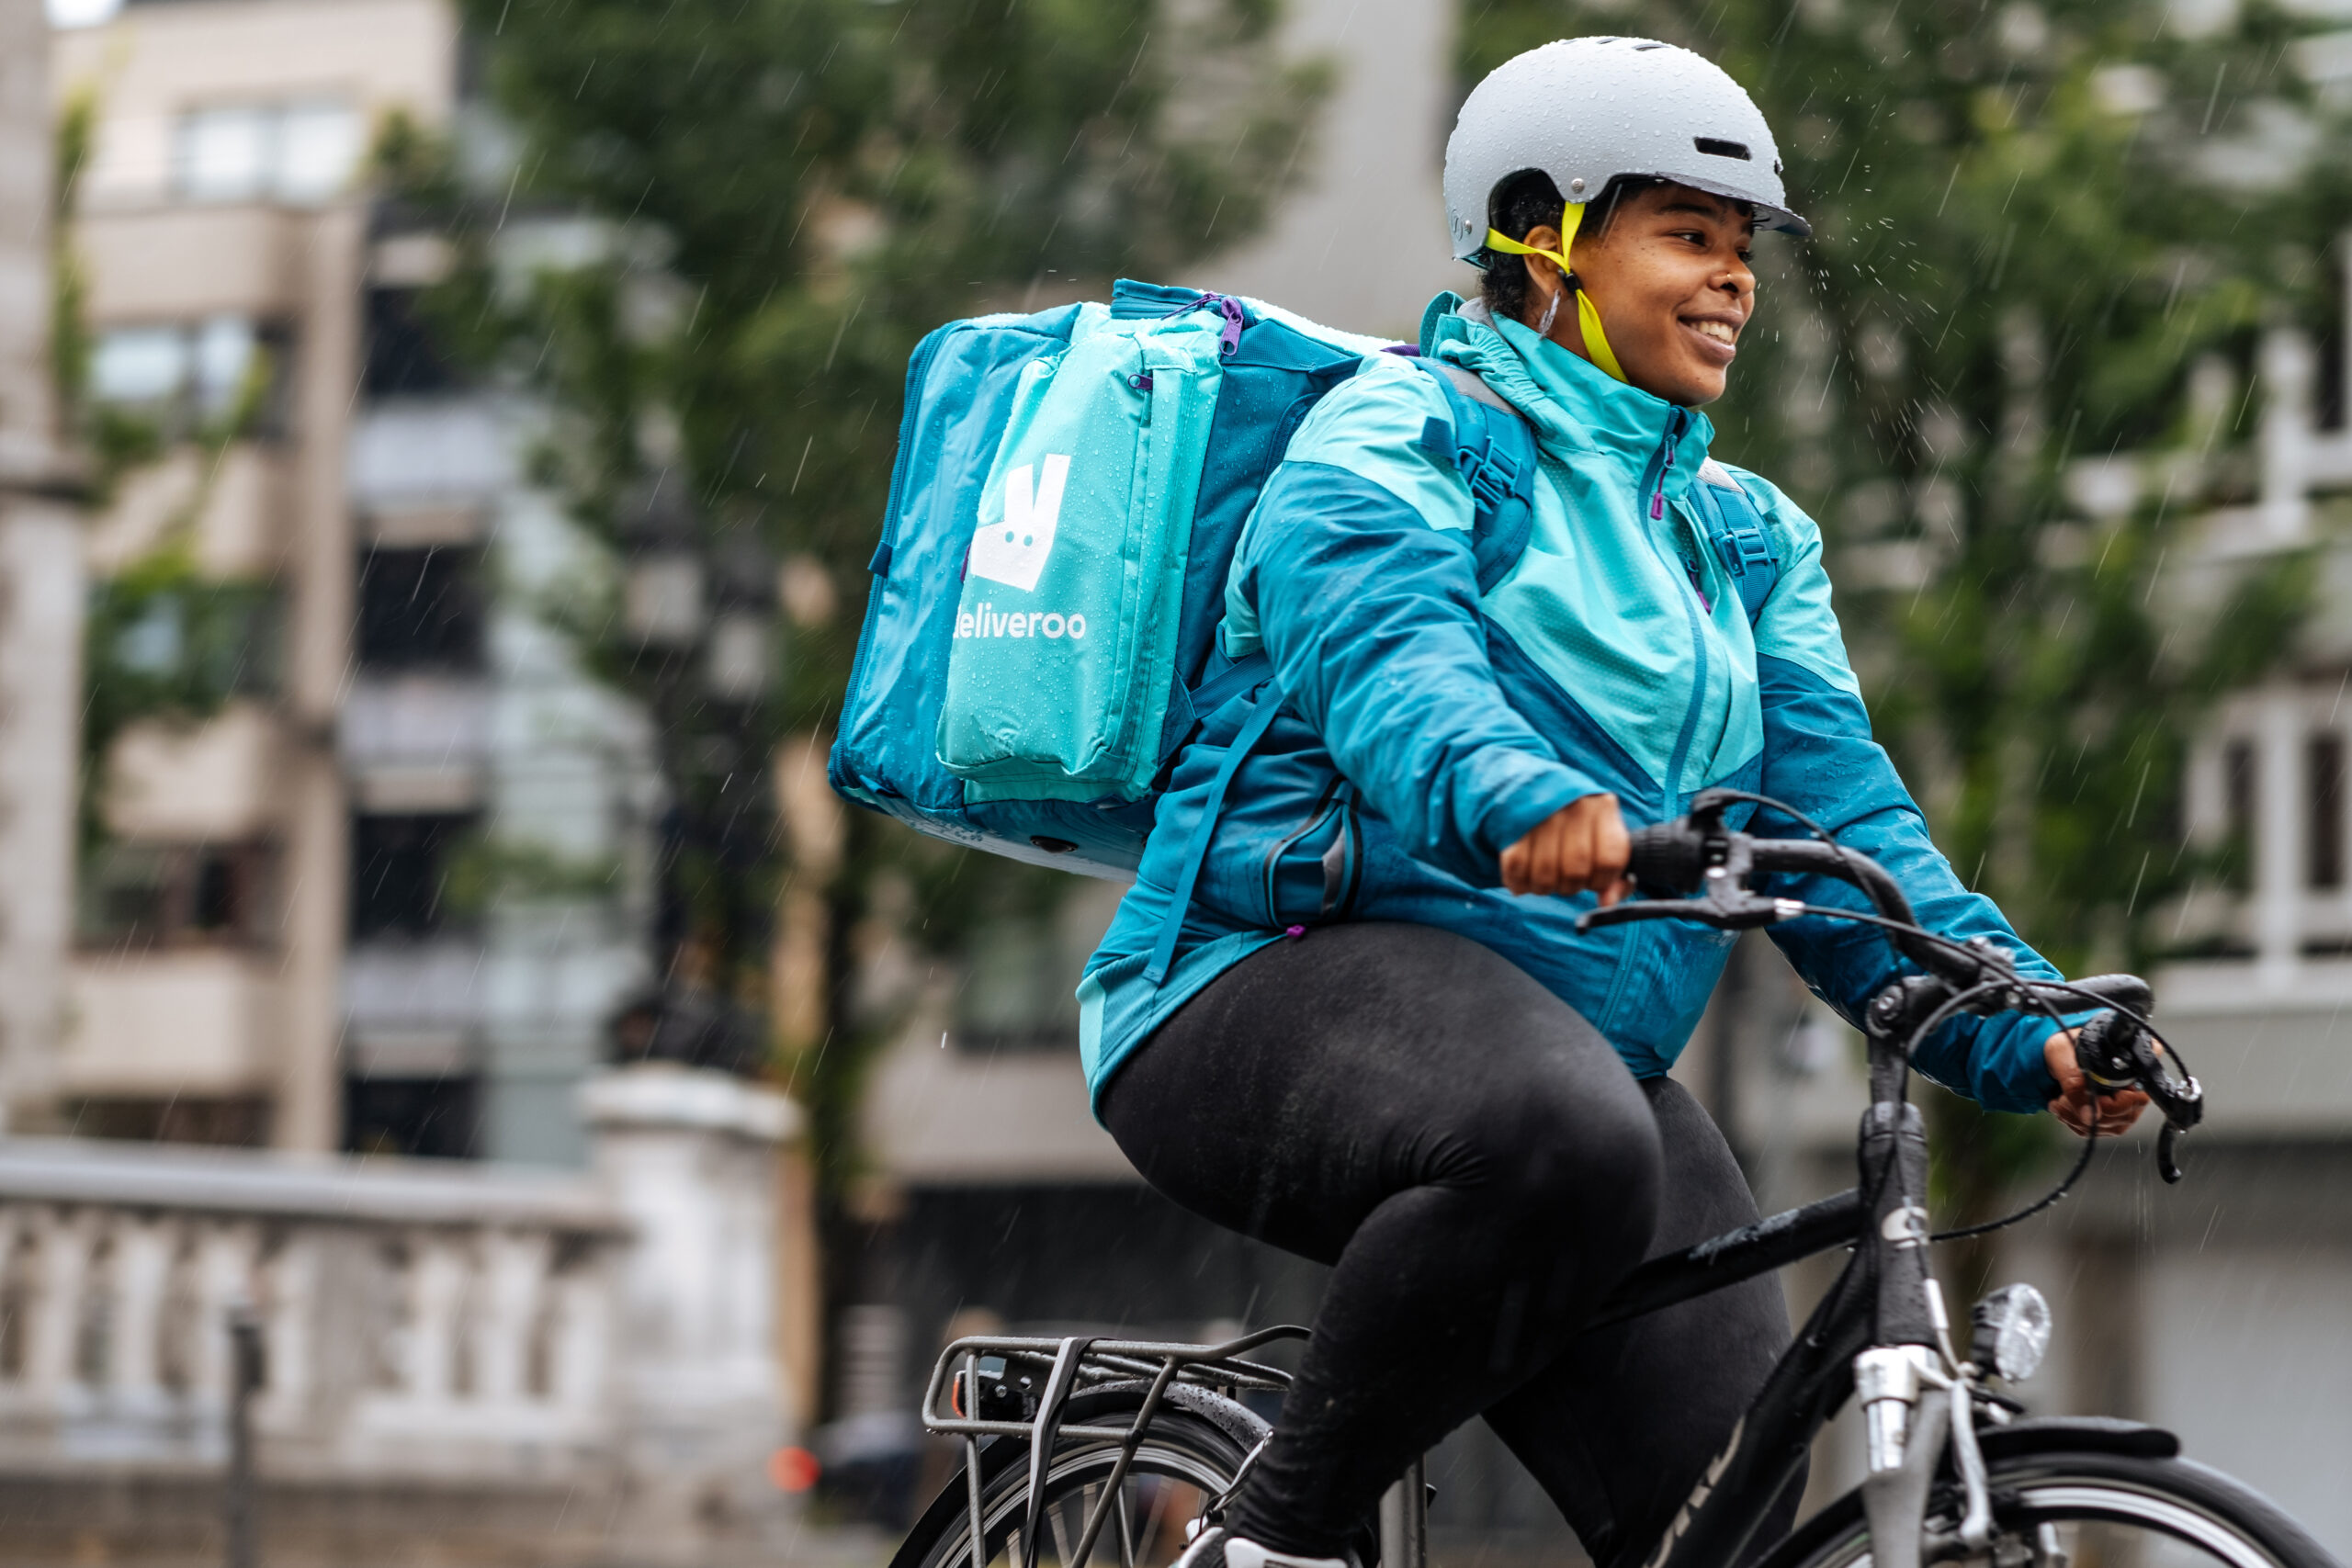 Co-op and Deliveroo agree partnership extension reaching 1,400 stores